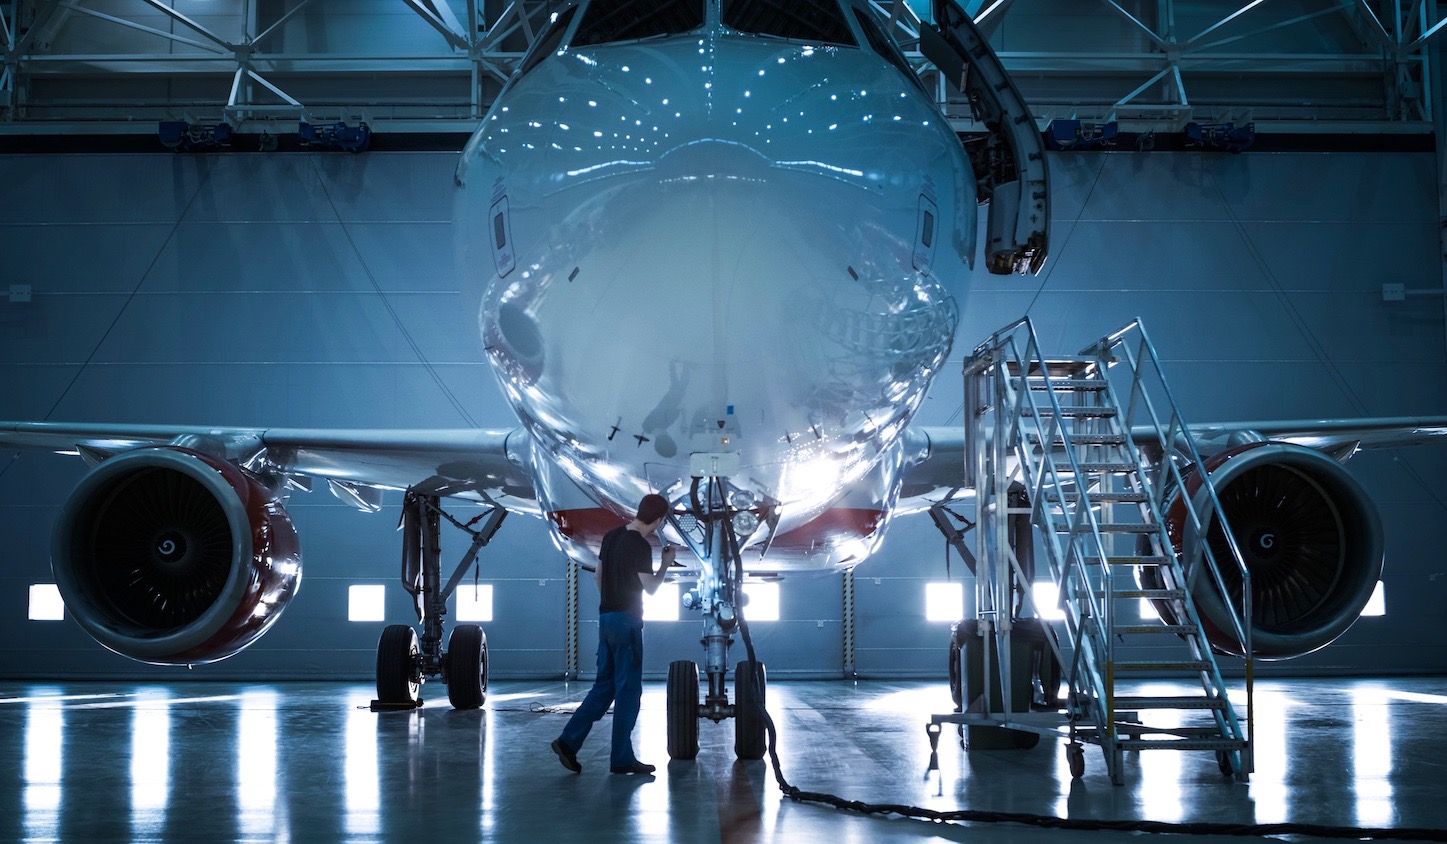 Aircraft System Failures: Condition Based & Predictive Maintenance